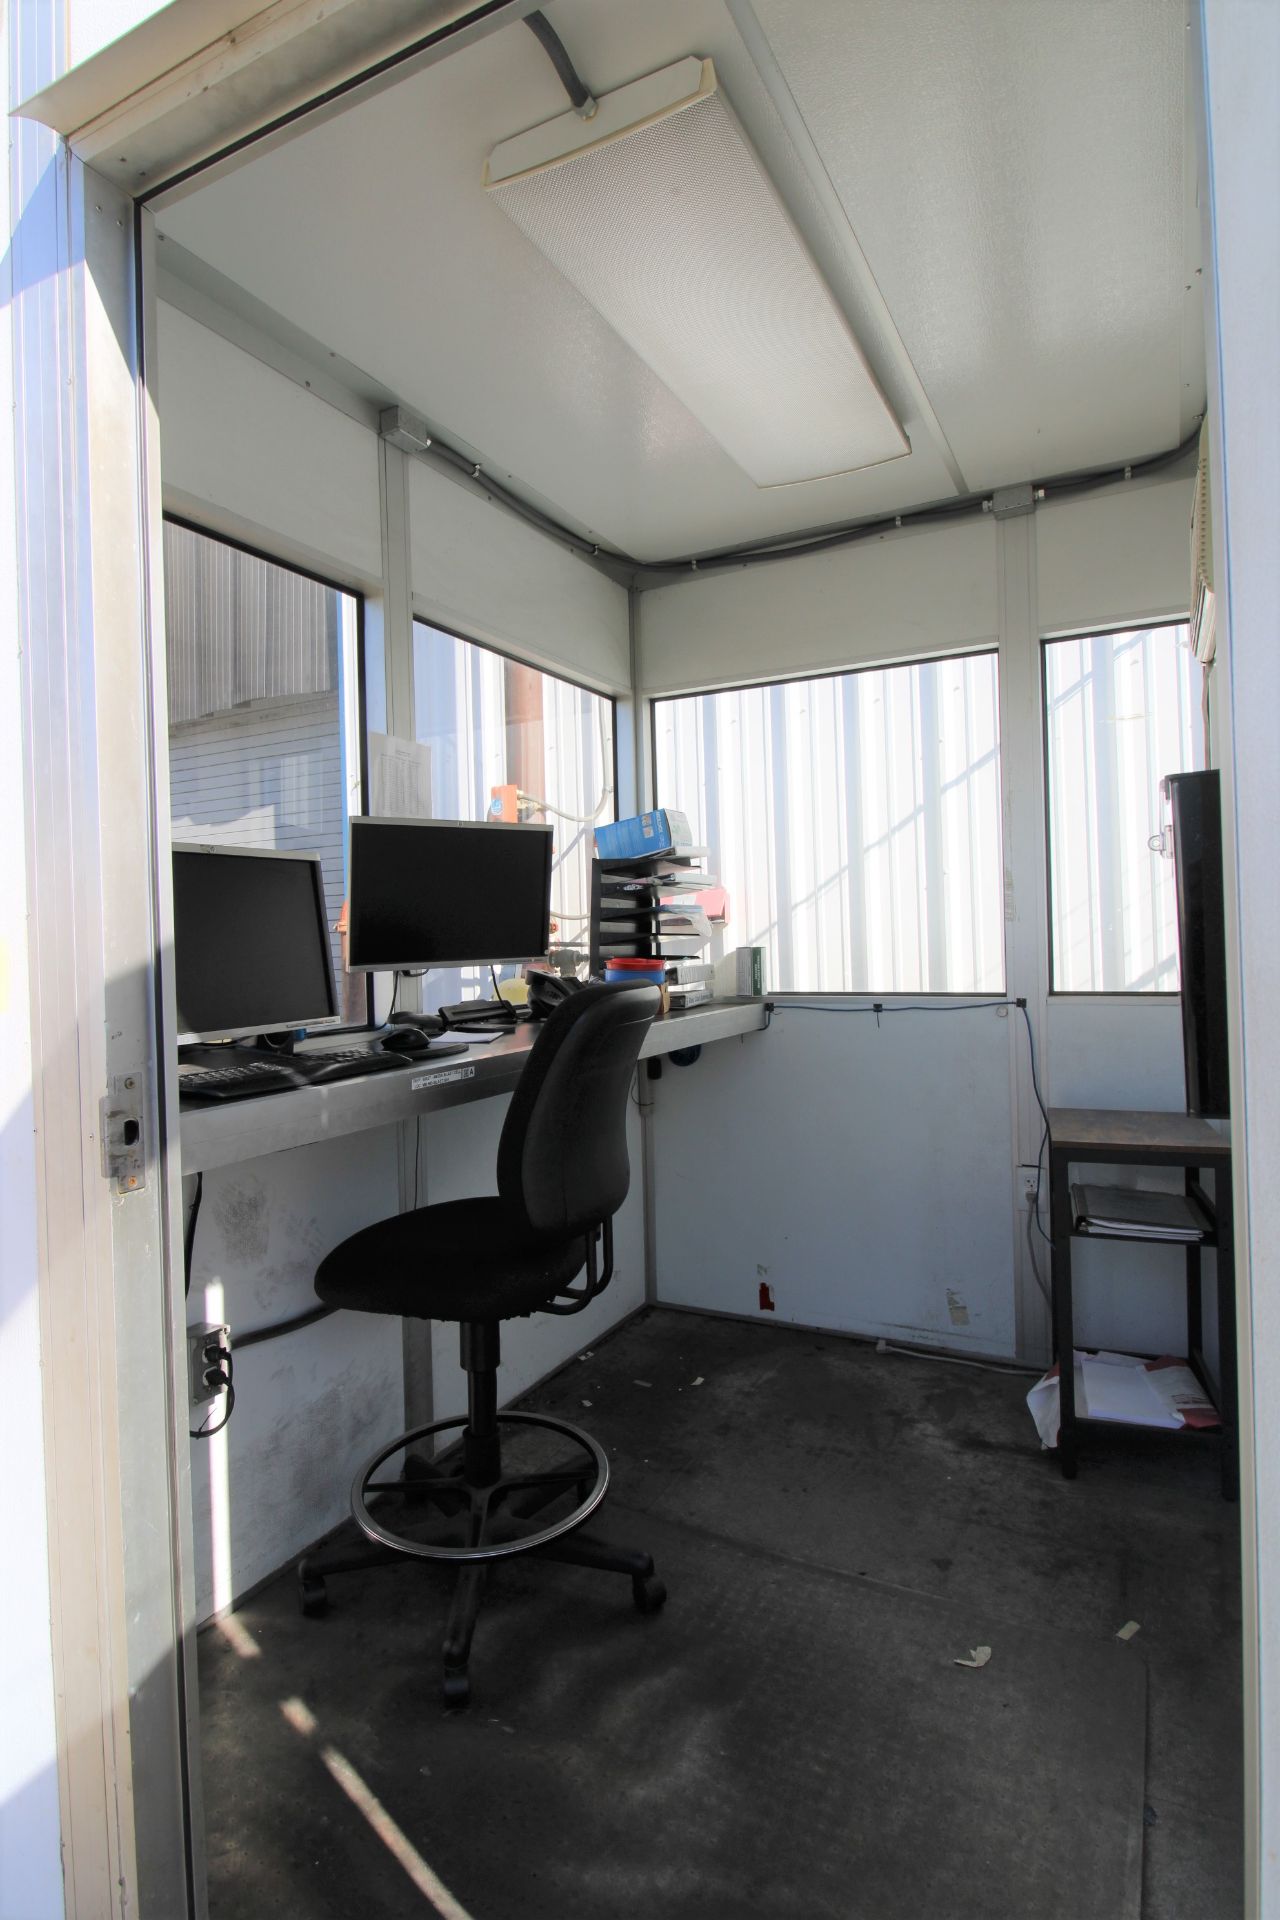 PORTABLE OUTDOOR BUILDING, 8' X 6' INTERIOR DIMS., insulated panel walls, multiple windows, entry - Image 5 of 5